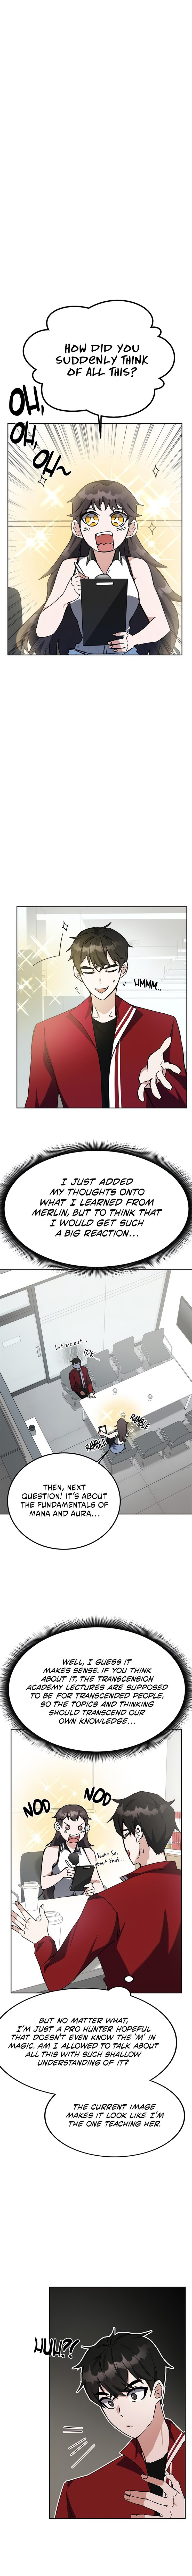 Transcension Academy - Chapter 26 Page 1